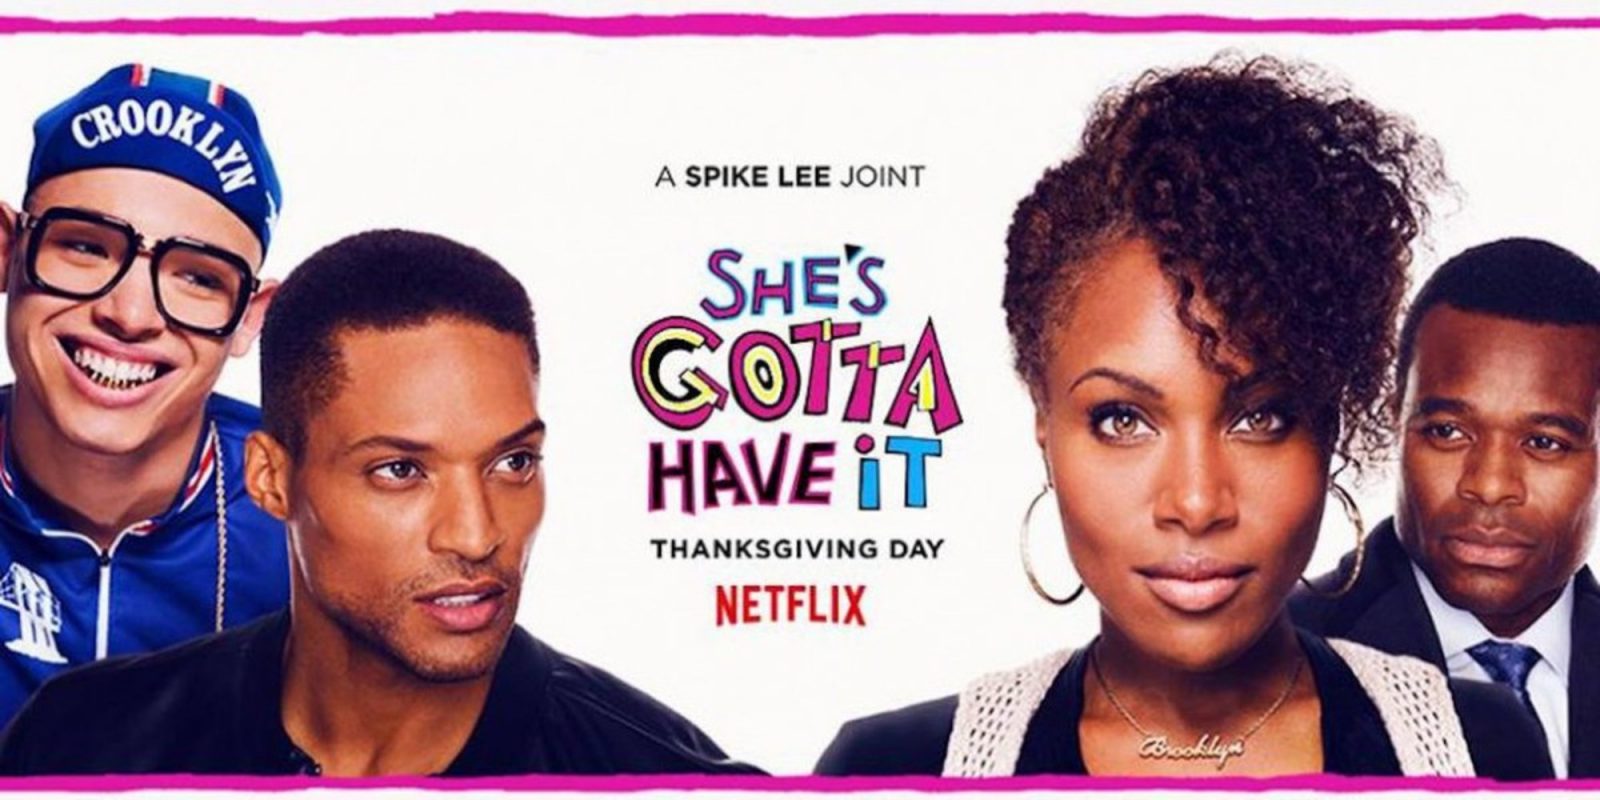 Spike lee’s netflix joint is just what was needed